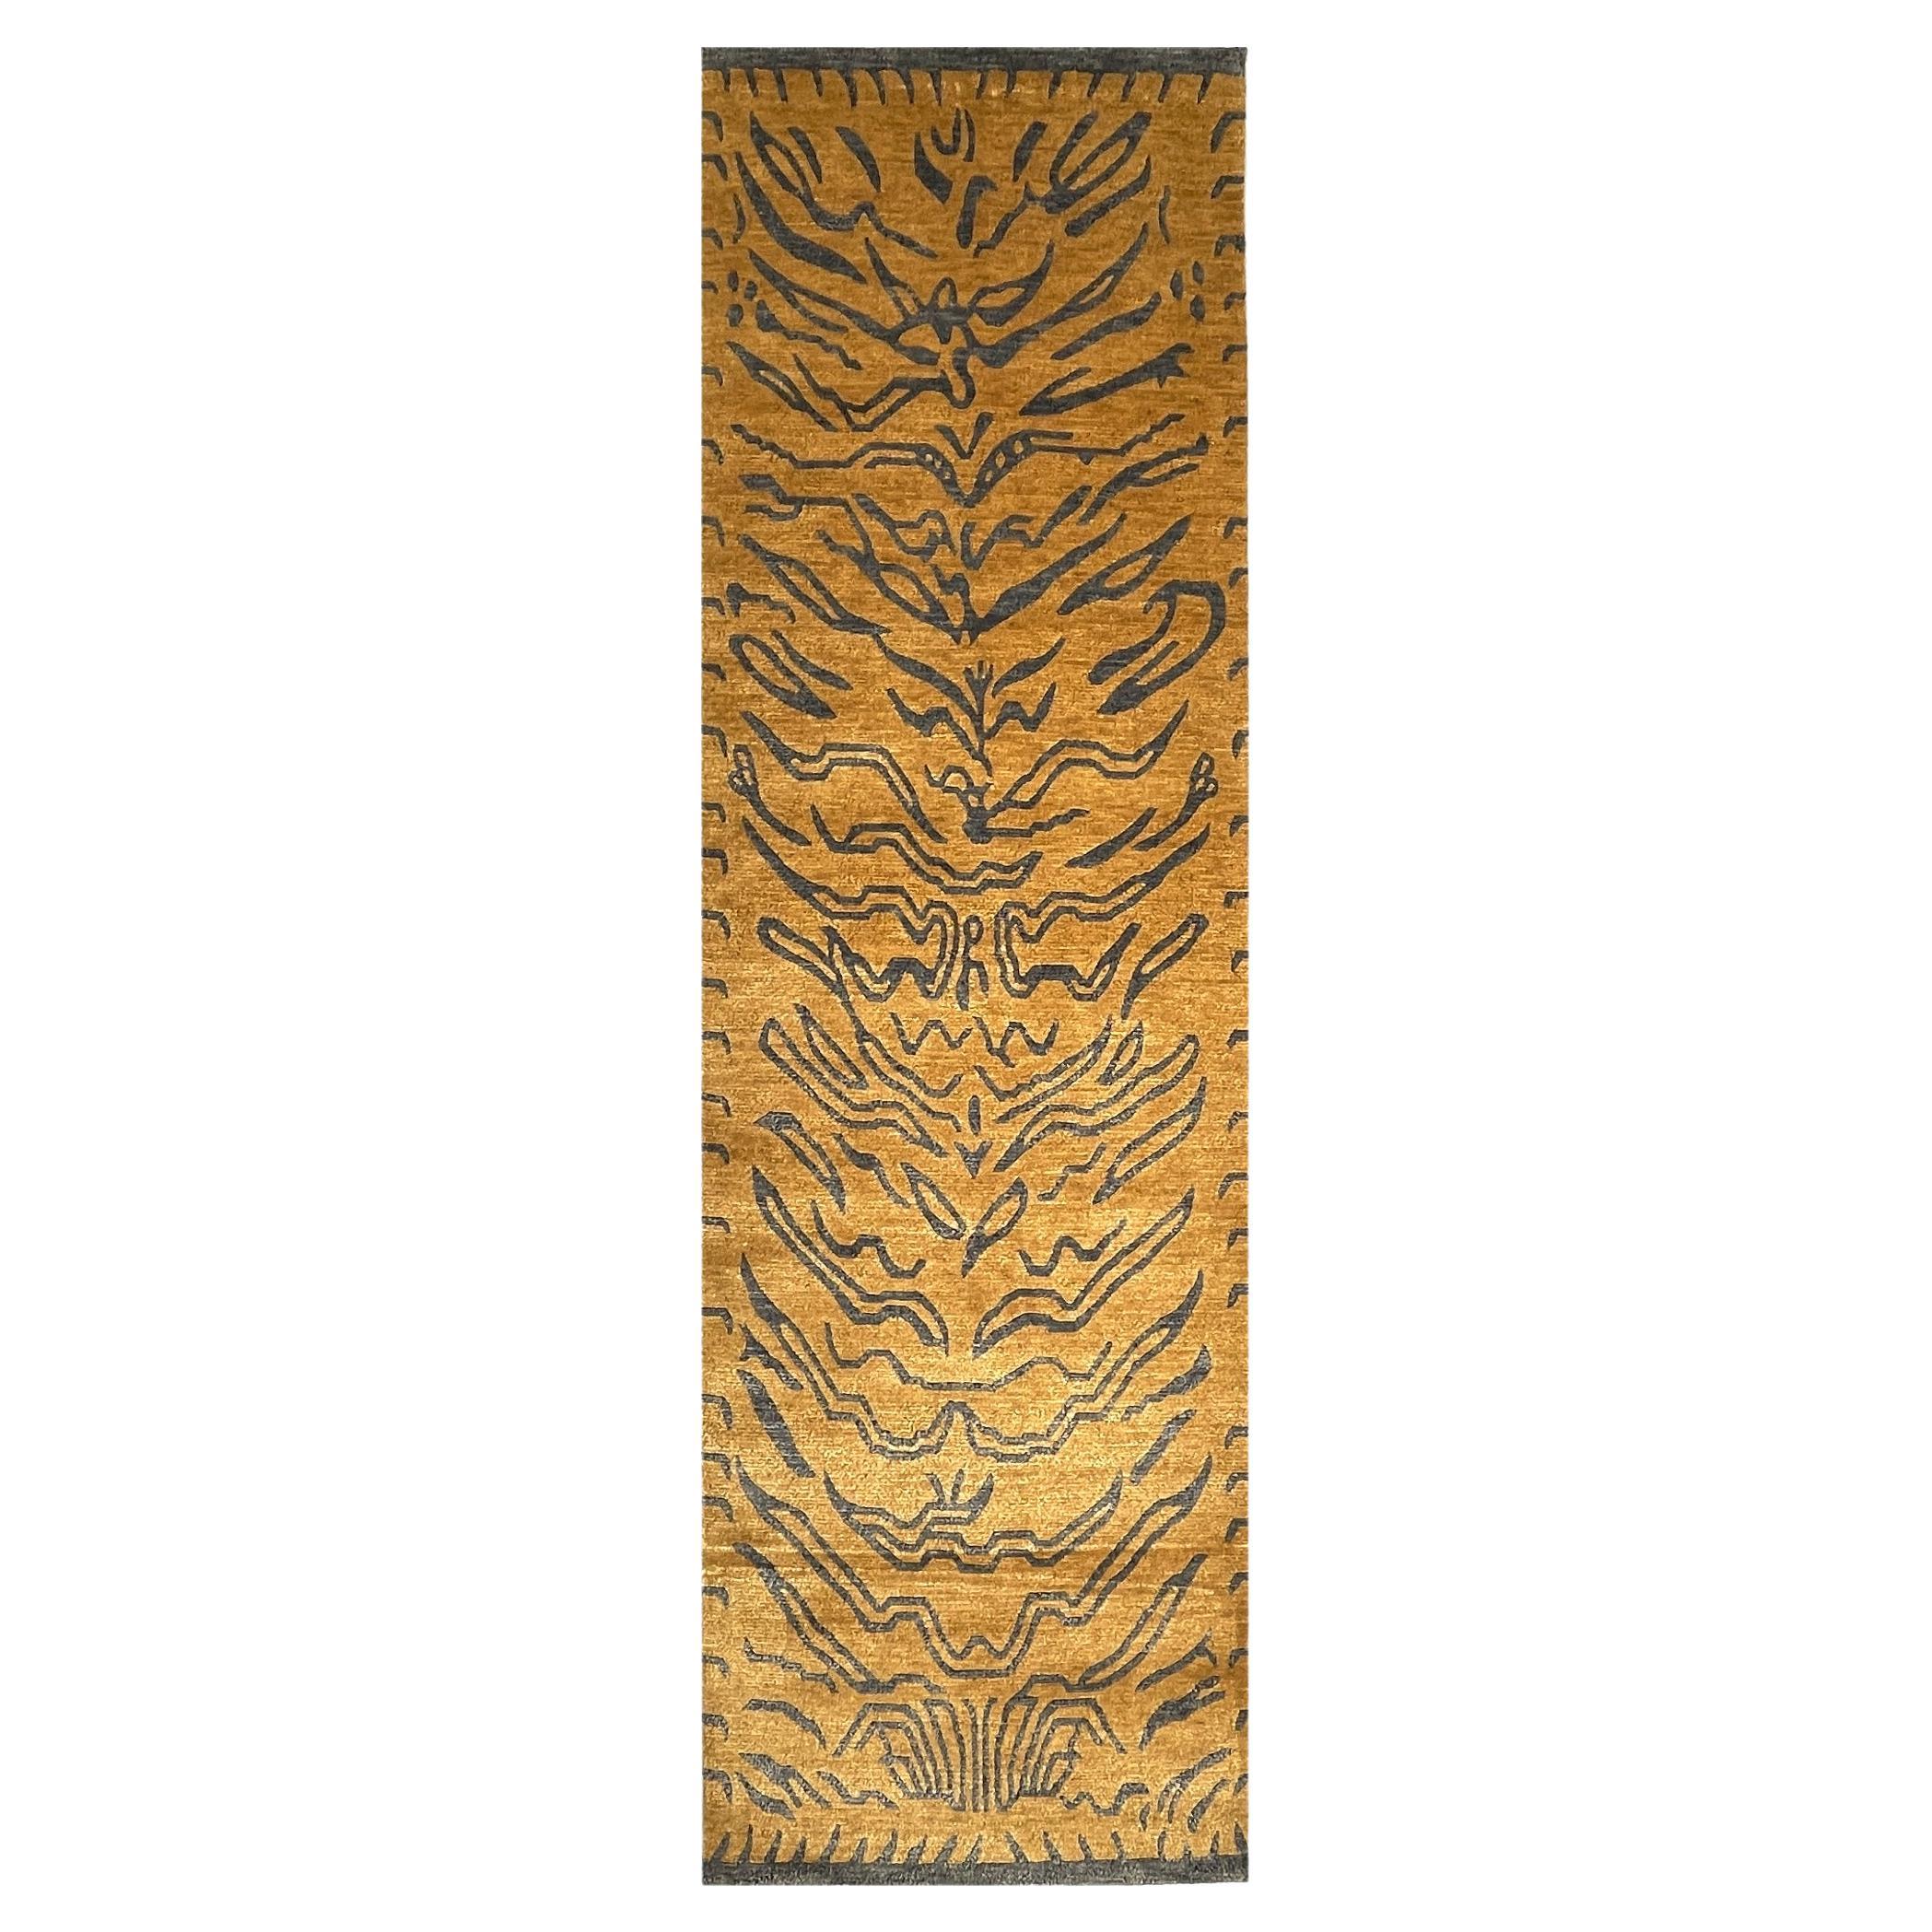 Tibetan Tiger Rug Hand Knotted Wool Silk Amber Charcoal by Djoharian Collection For Sale